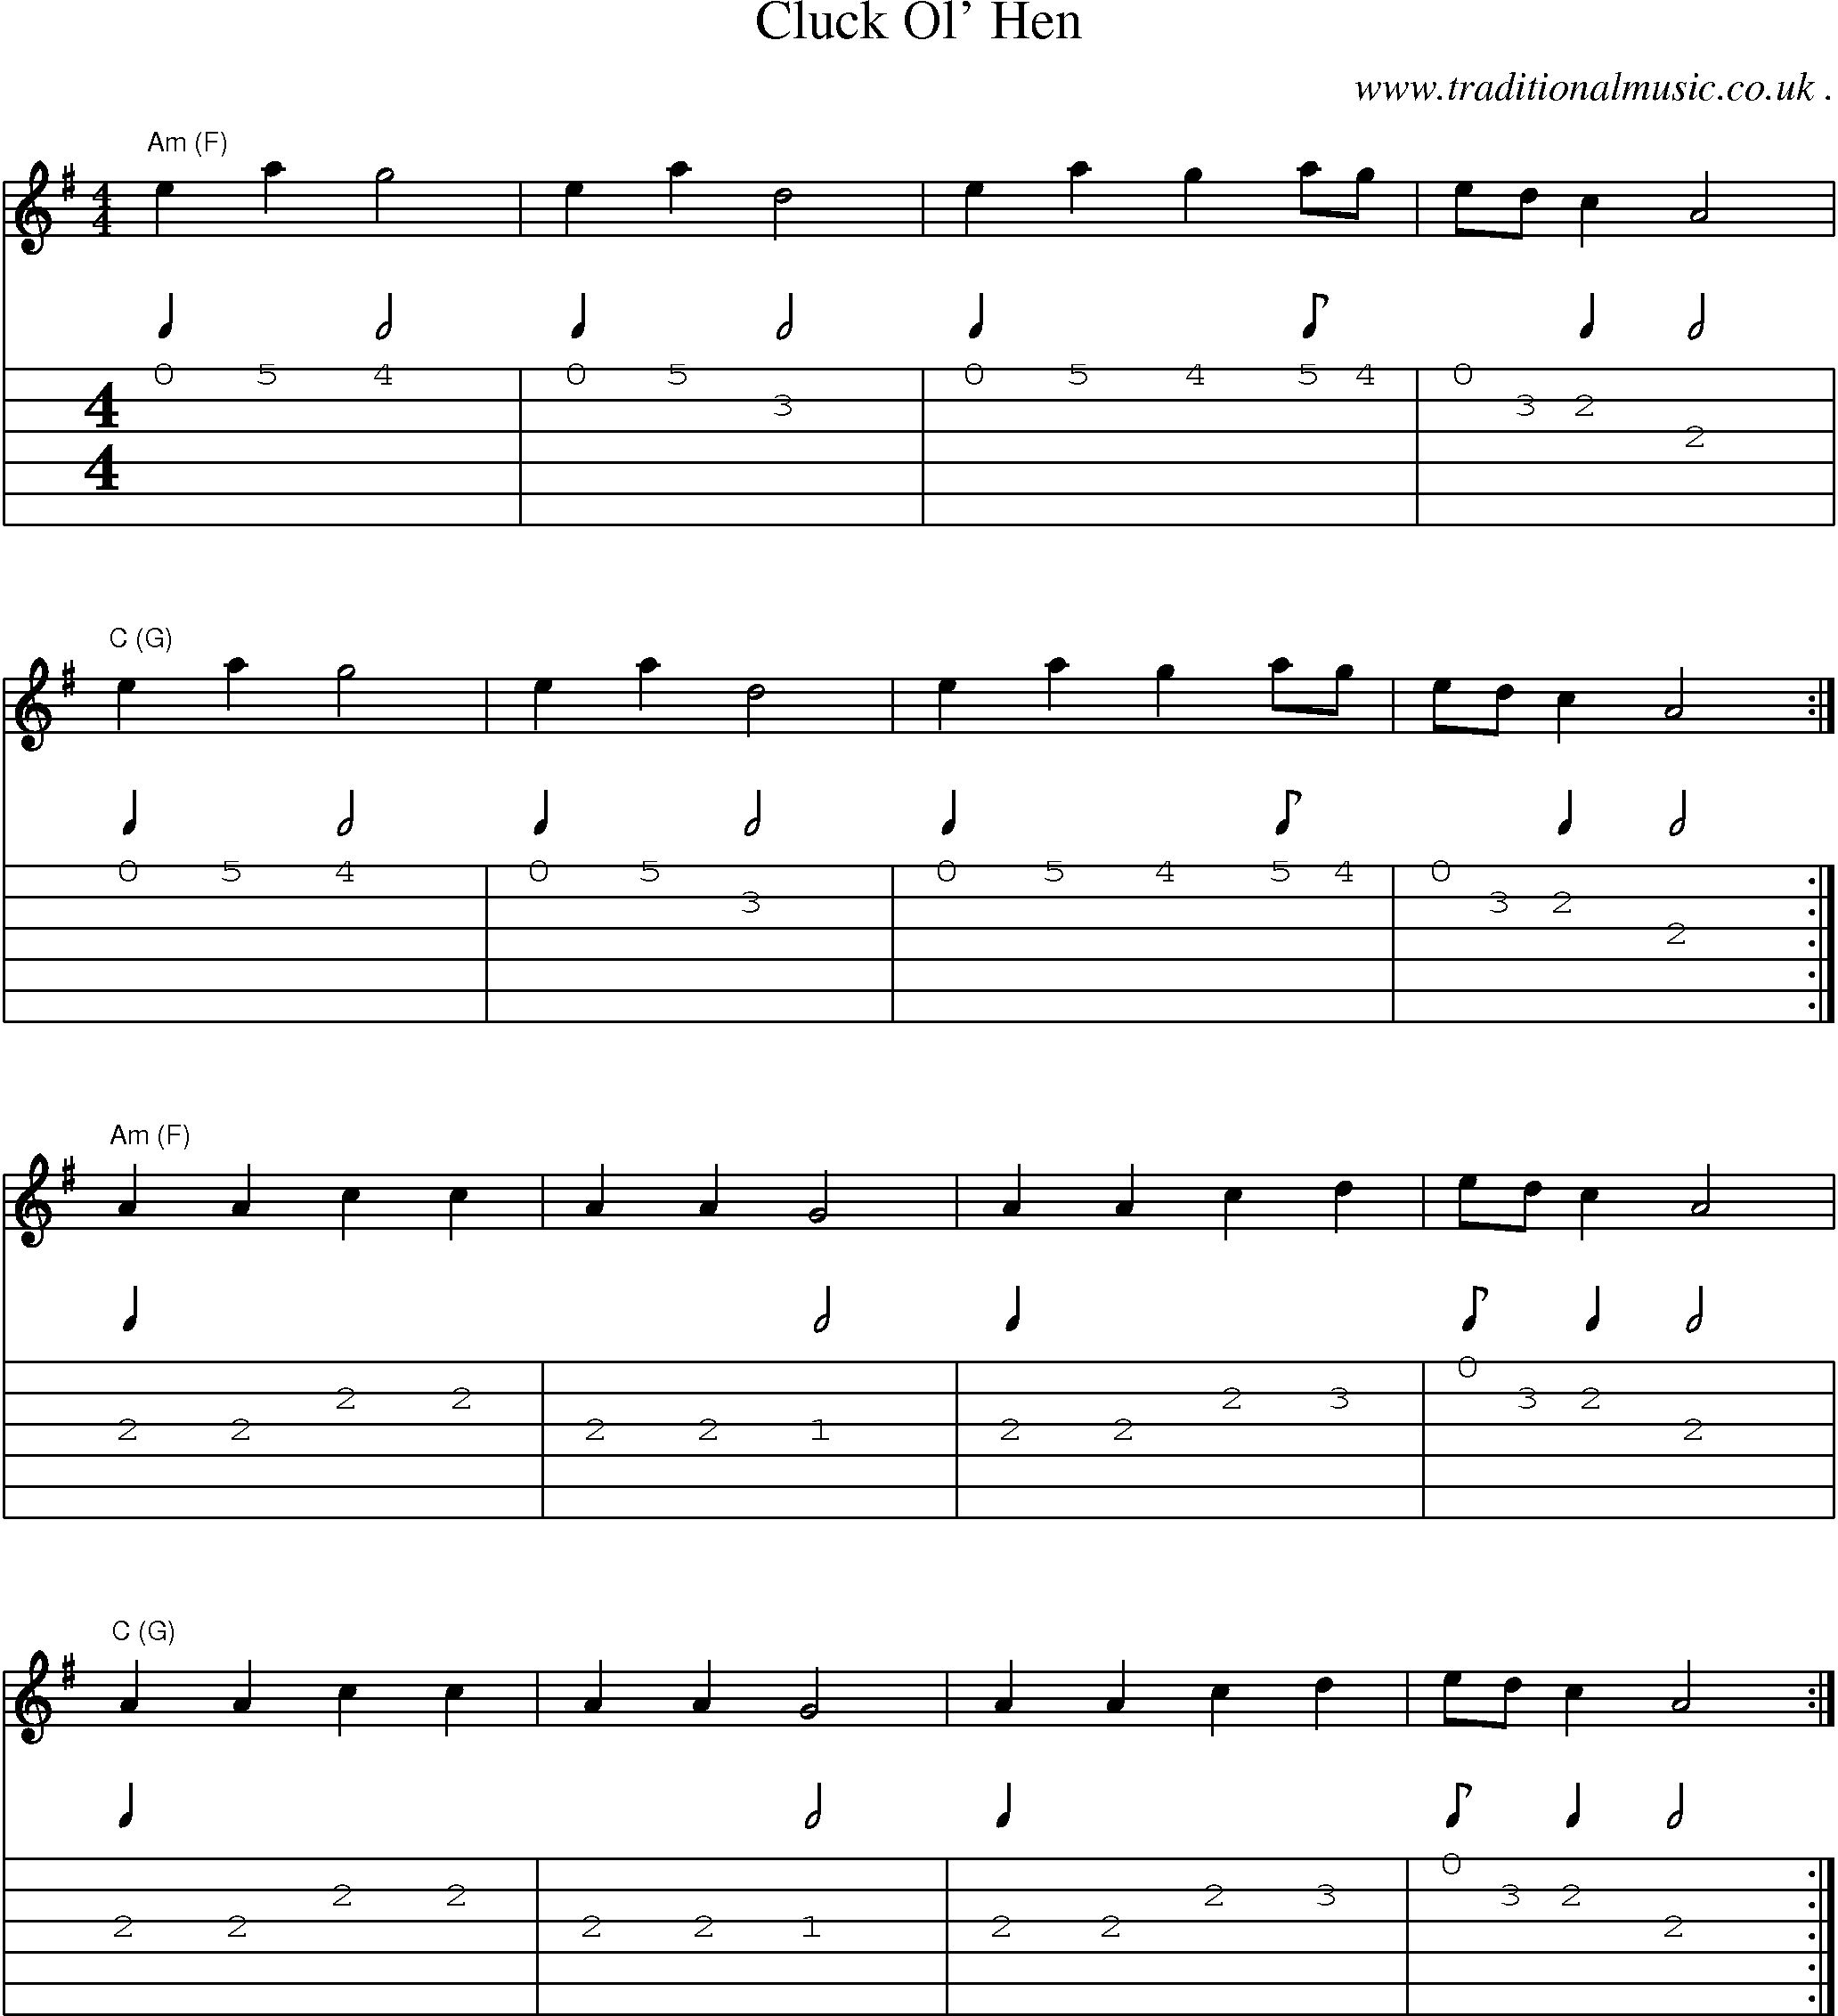 Music Score and Guitar Tabs for Cluck Ol Hen